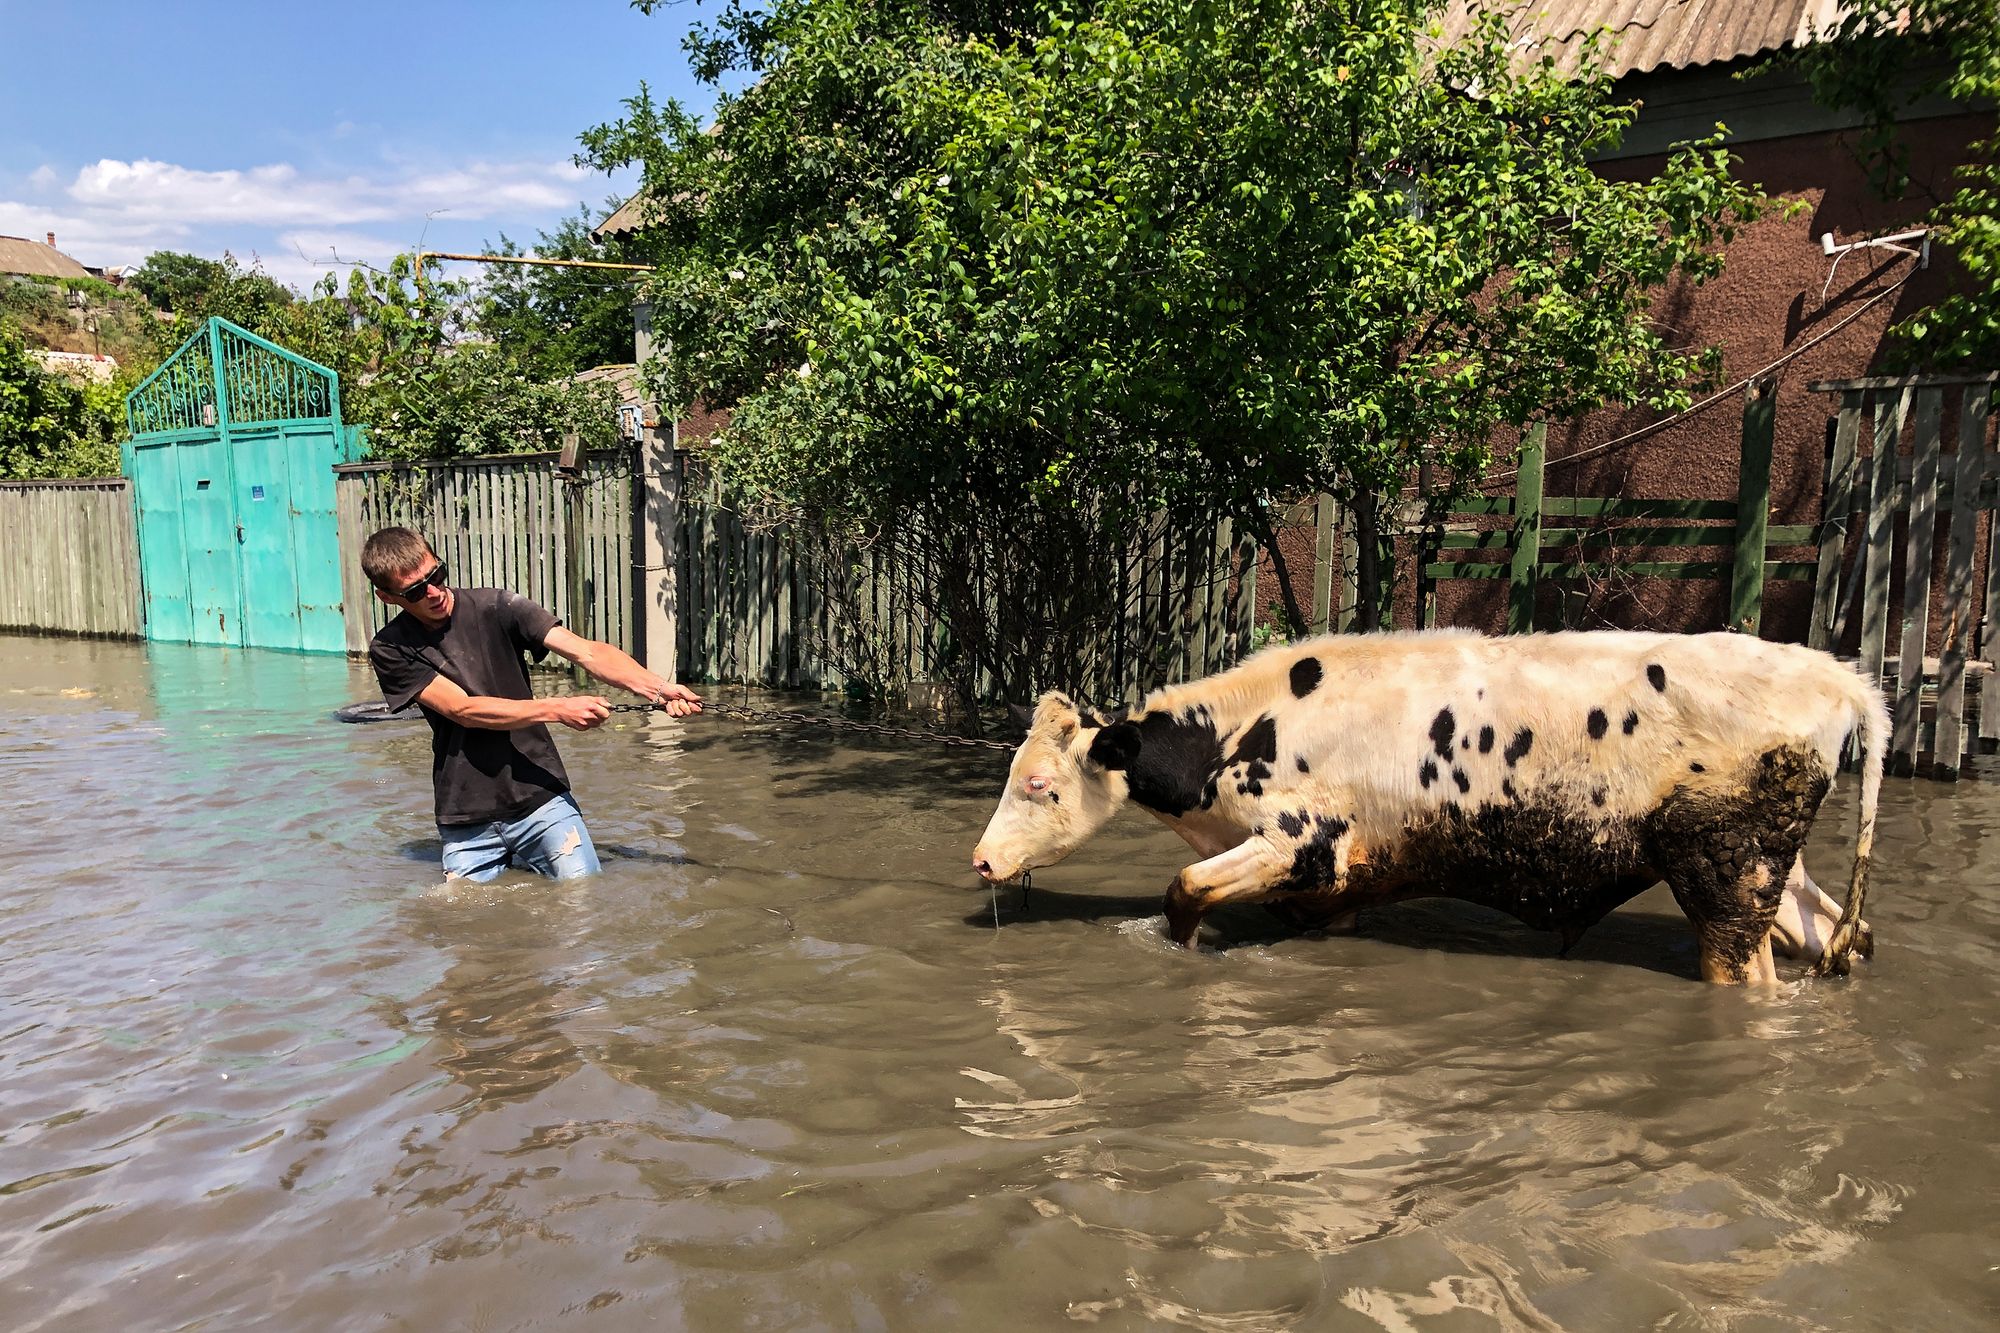 Governor: At least 1,335 houses flooded in Ukrainian-controlled part of Kherson Oblast